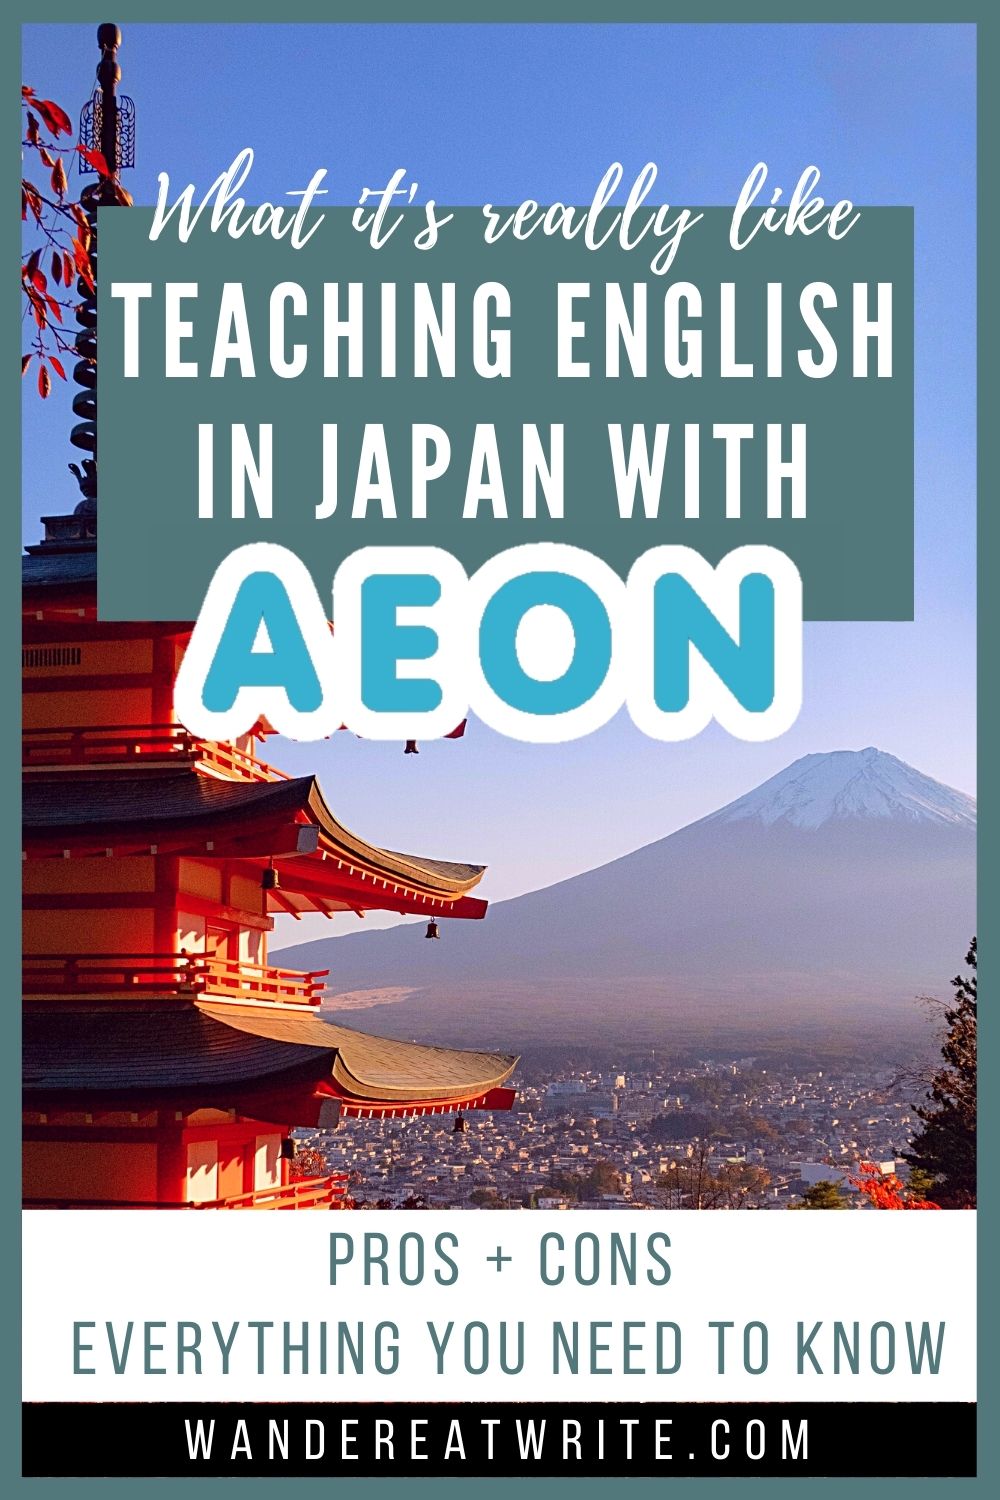 What it's really like teaching English in Japan with AEON